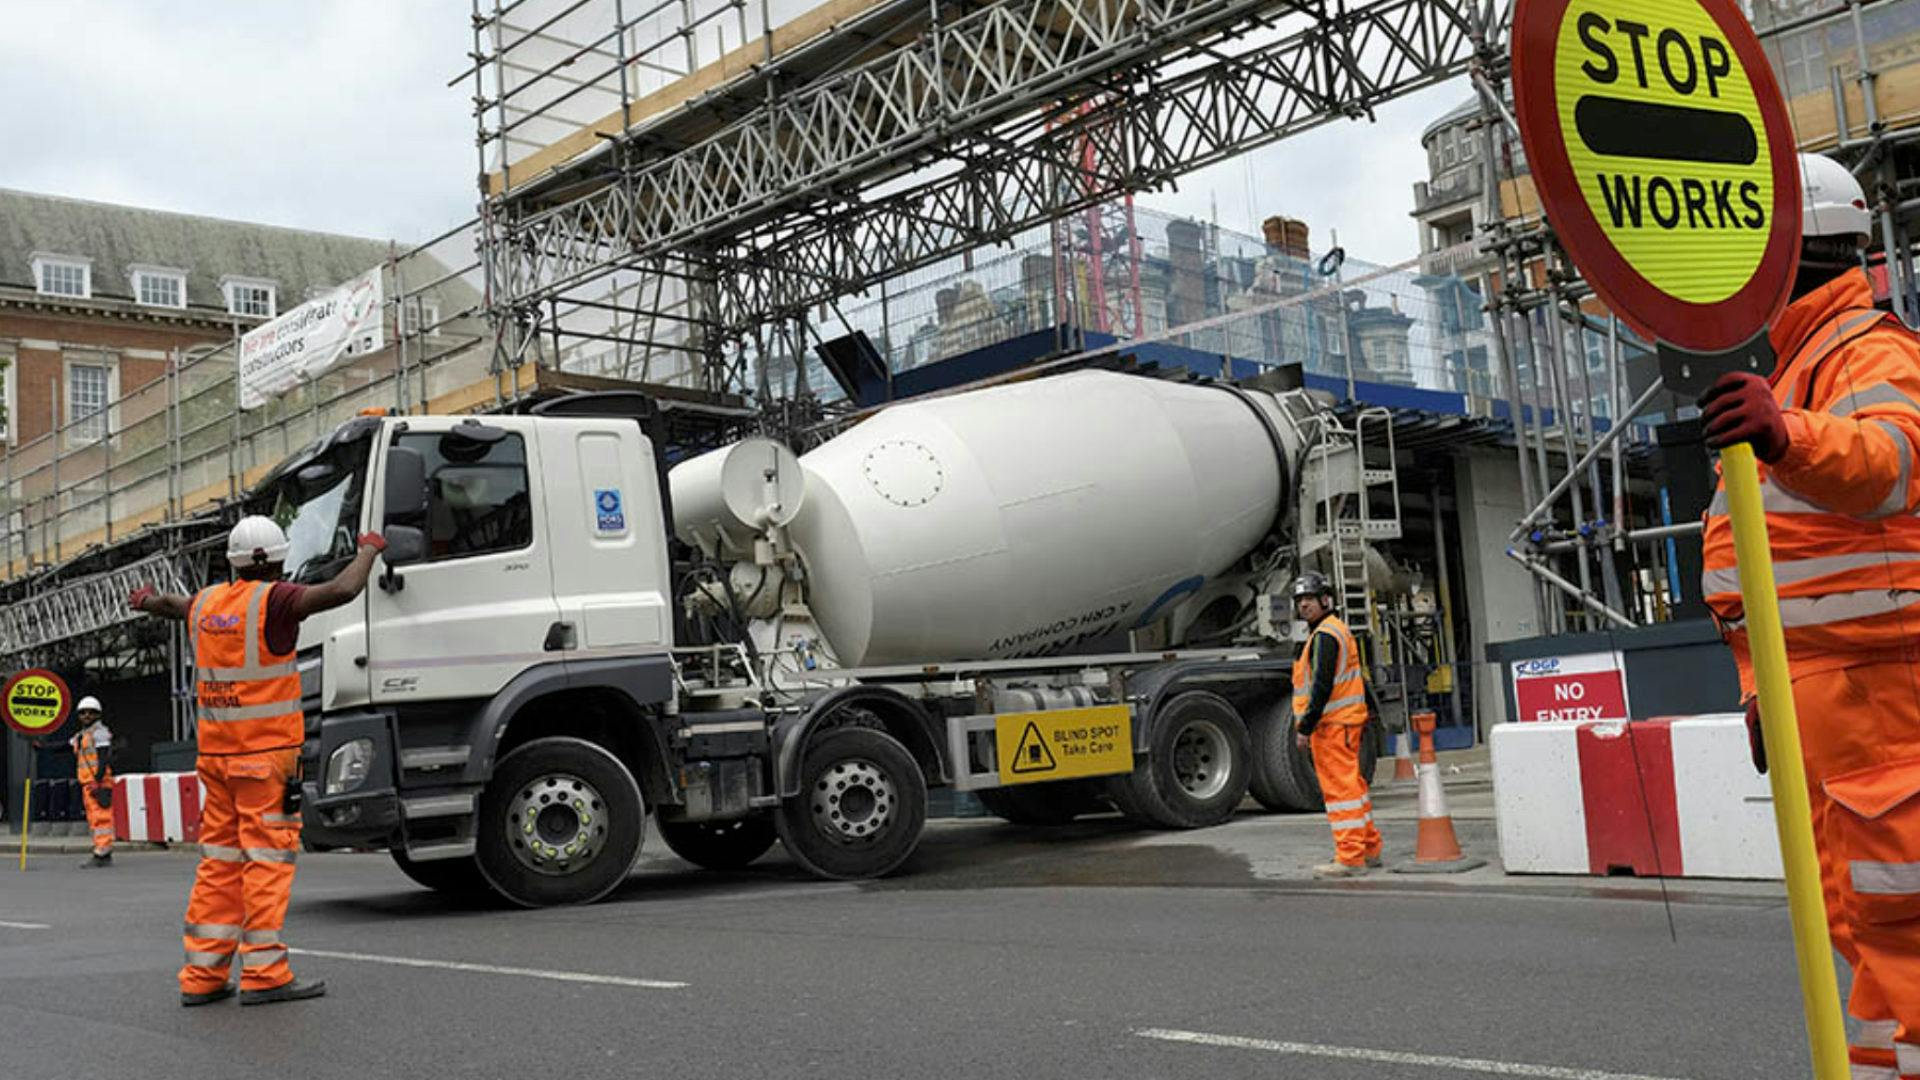 Lorry exiting a building site with workmen guiding them out and stopping traffic